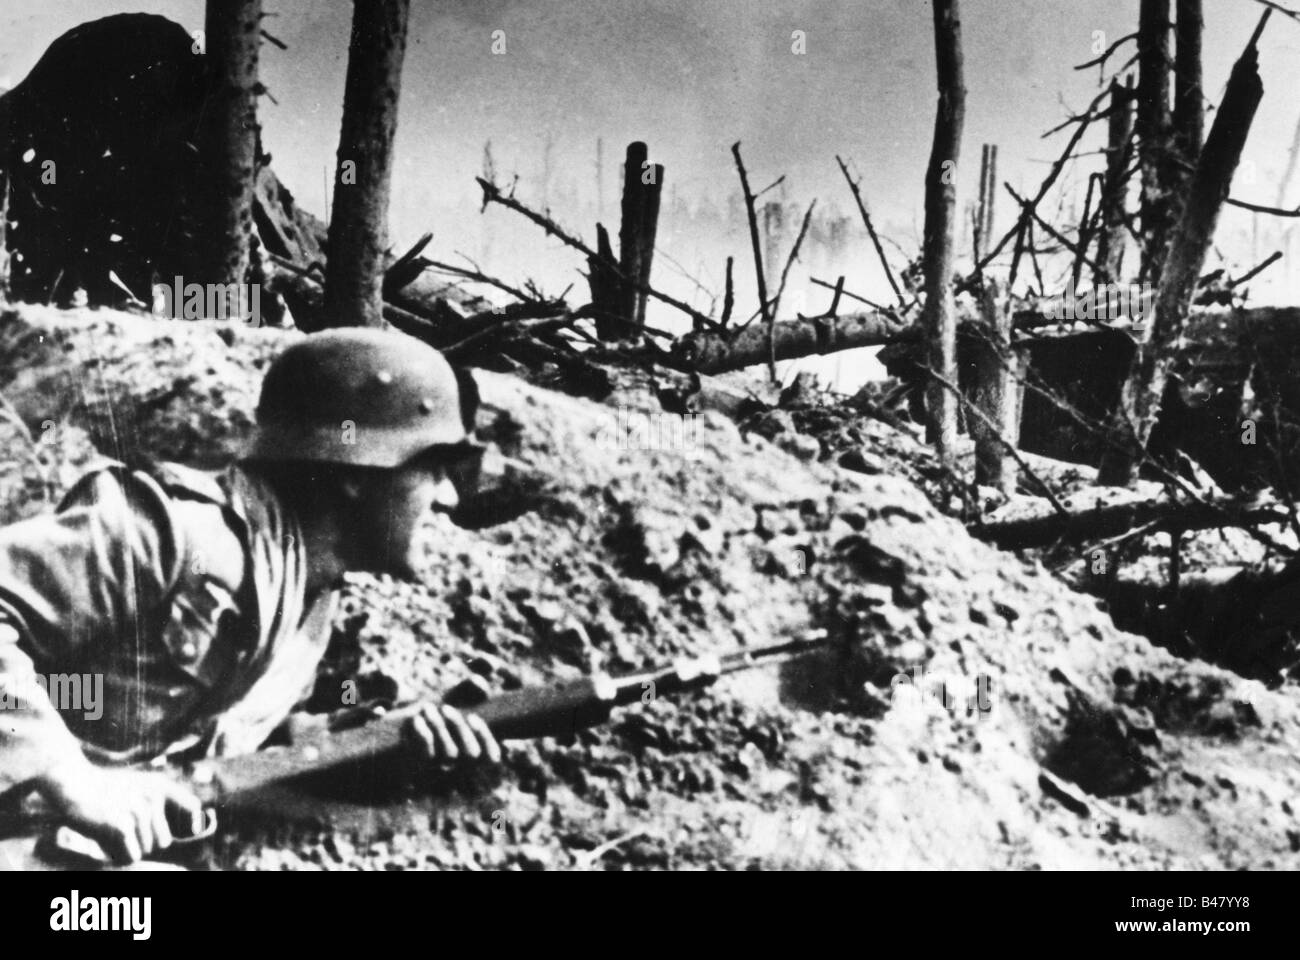 events, Second World War / WWII, Russia 1942 / 1943, German soldier taking cover in a destroyed forrest, 1942, Eastern Front, Soviet Union, USSR, 20th century, historic, historical, Wehrmacht, steel helmet, Karabiner 98k, 98, carbine, rifle, 1940s, people, Stock Photo